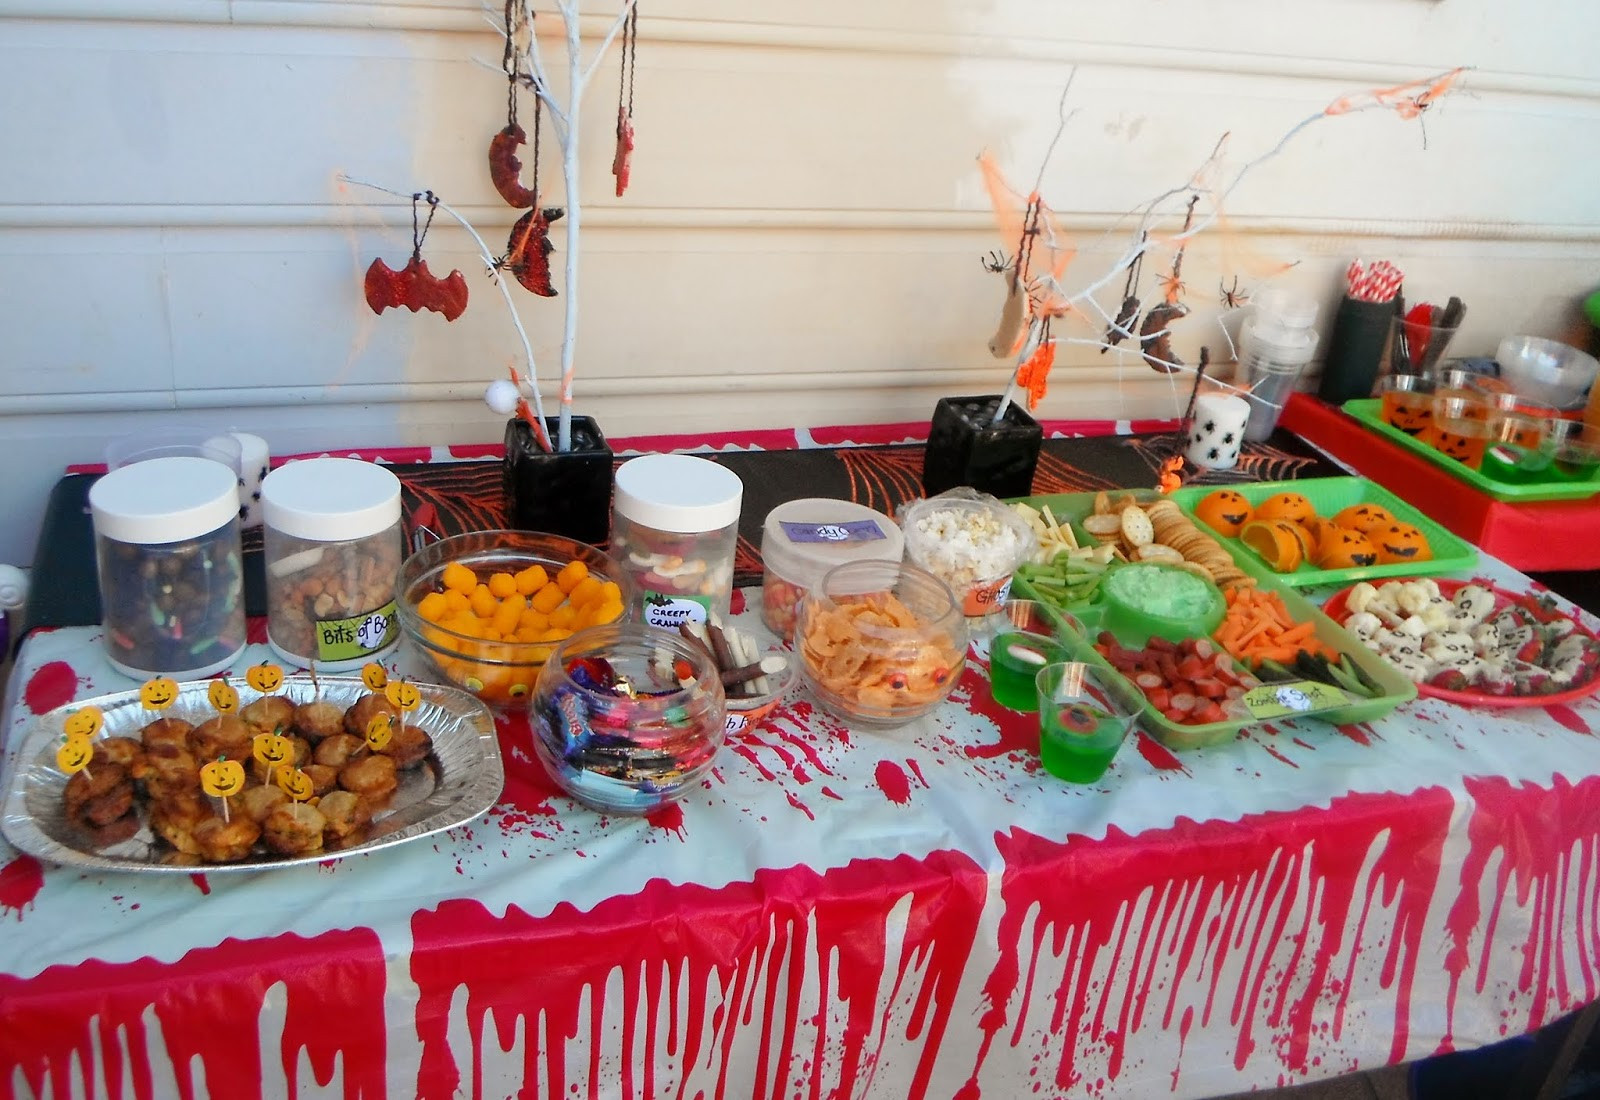 Halloween Recipe Ideas Party
 Adventures at home with Mum Halloween Party Food